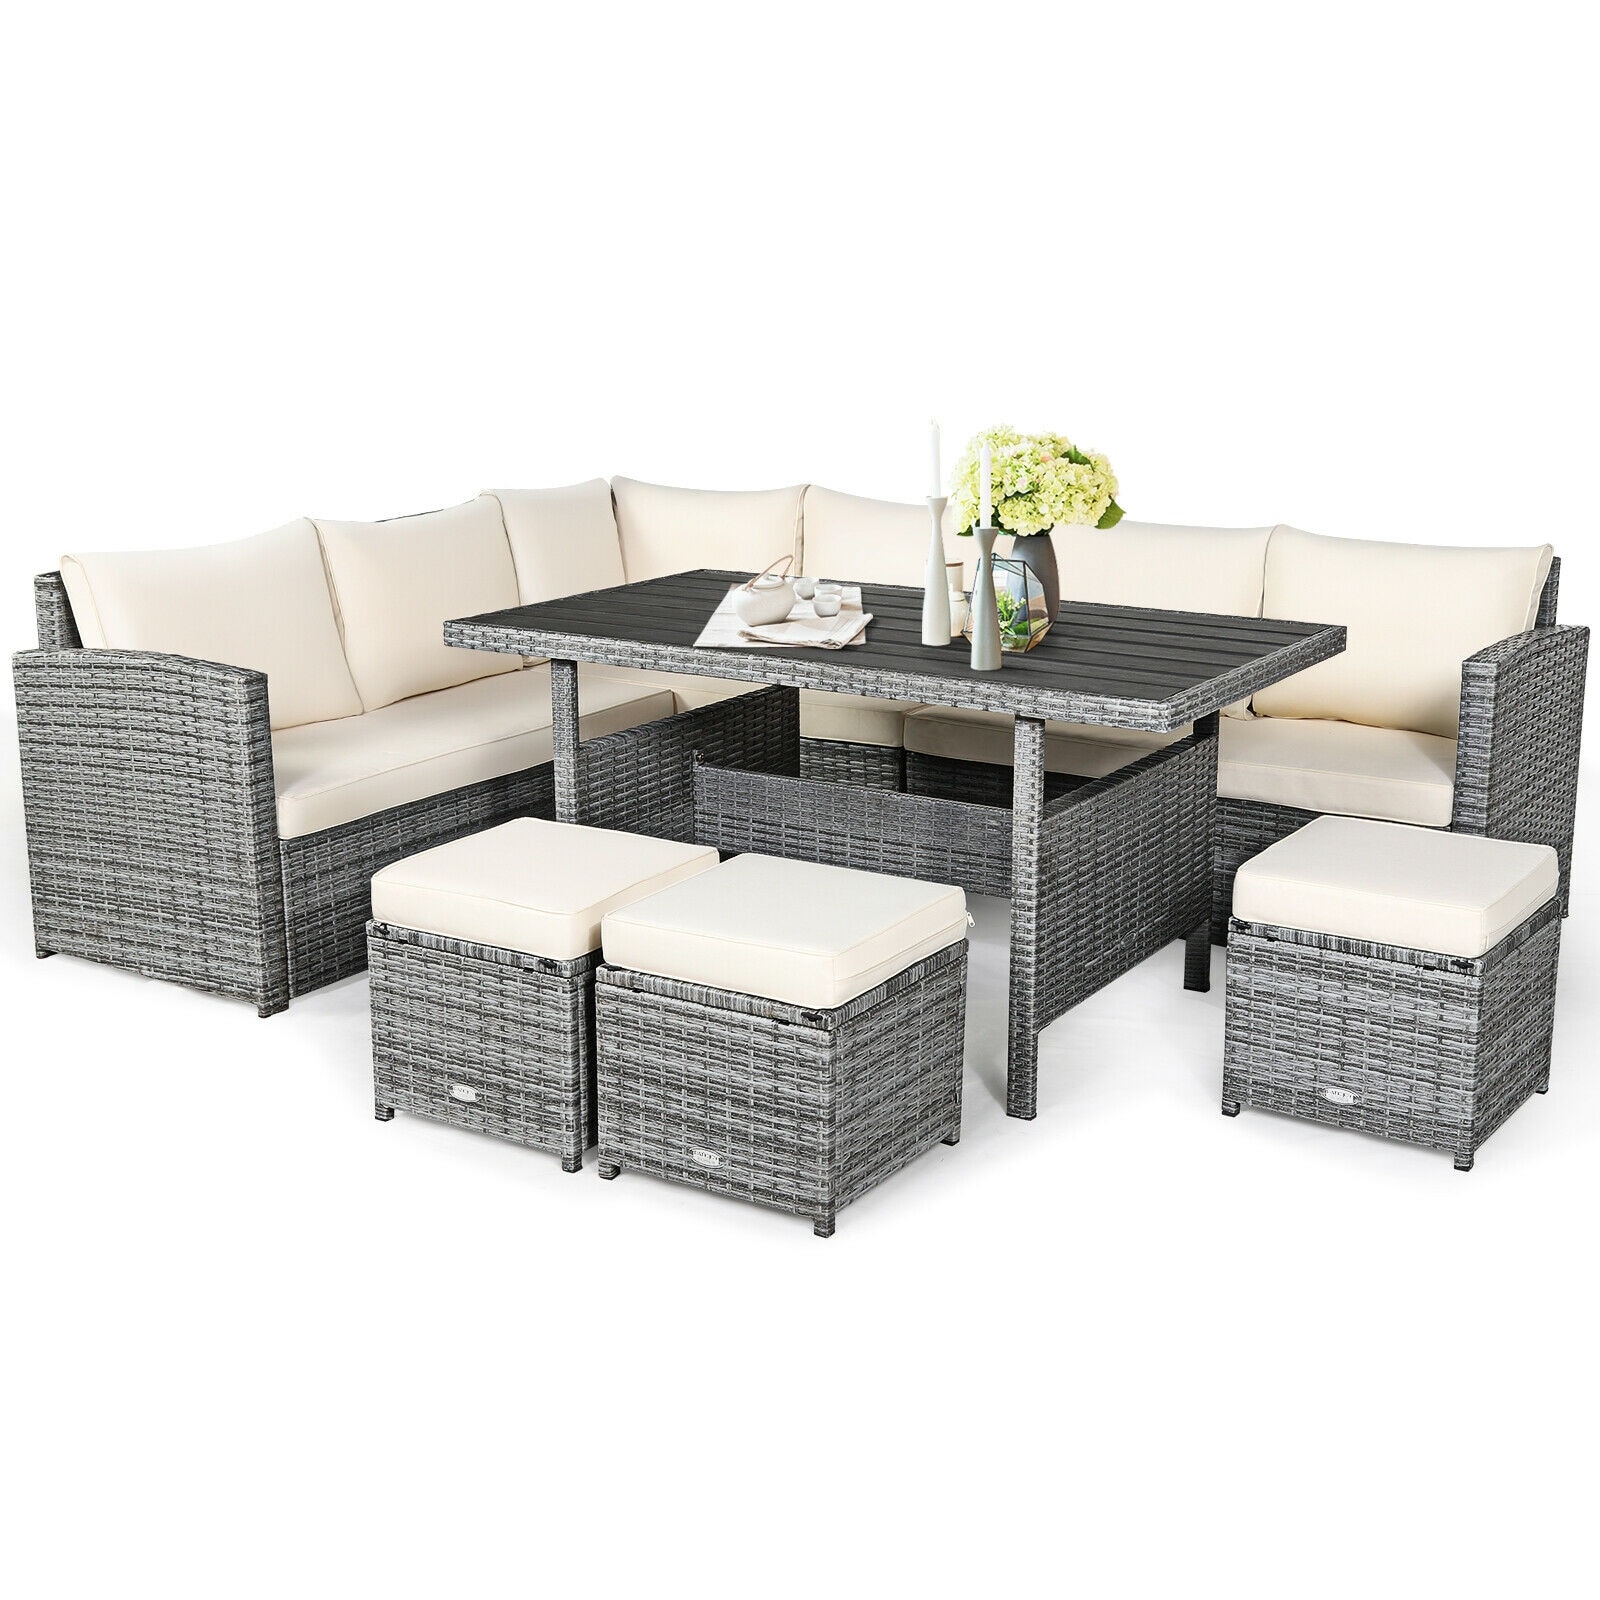 7 Pieces Patio Rattan Beige Dining Furniture Sectional Sofa Set with Wicker Ottoman | - Forclover HYFAS18WH